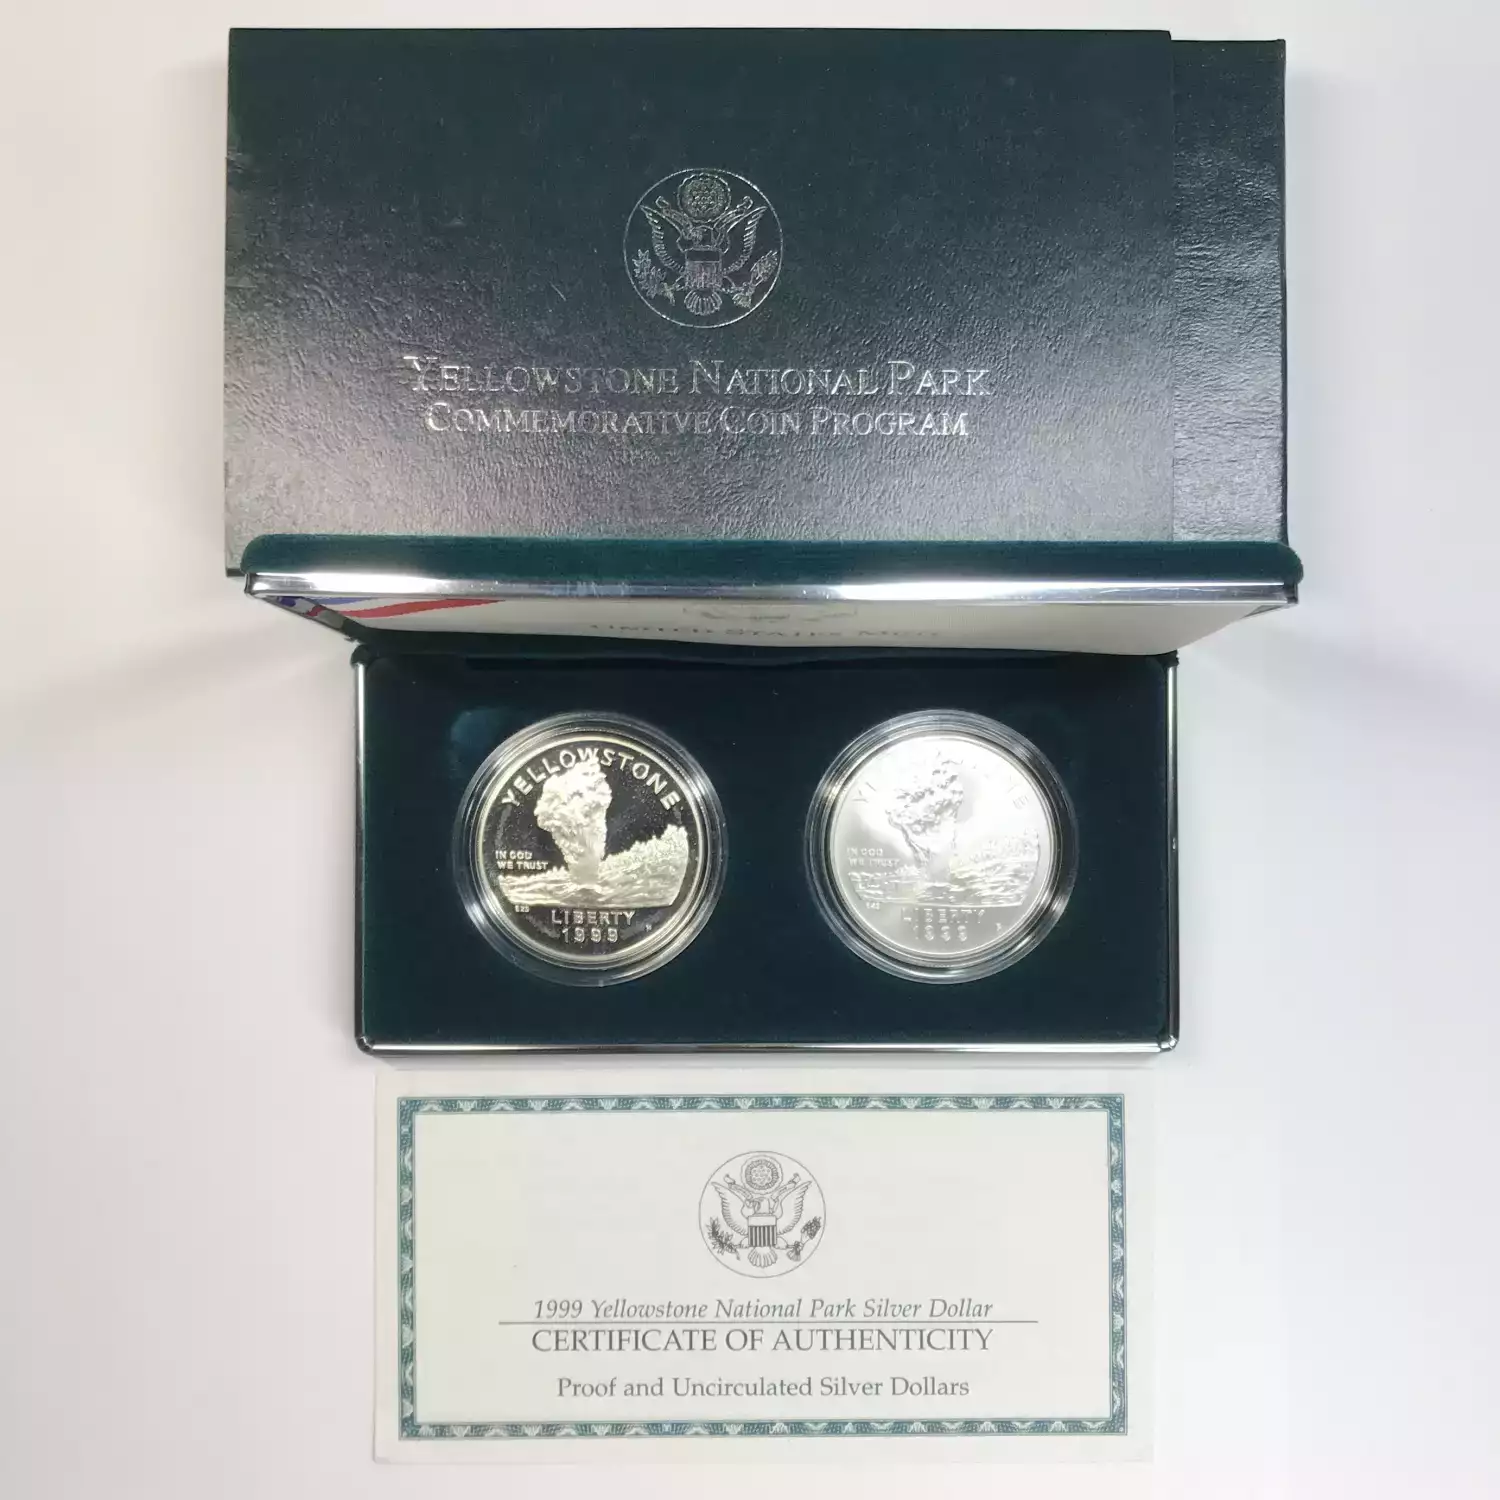 1999 Yellowstone Two-Coin Proof & Uncirculated Silver Dollar Set US Mint OGP 